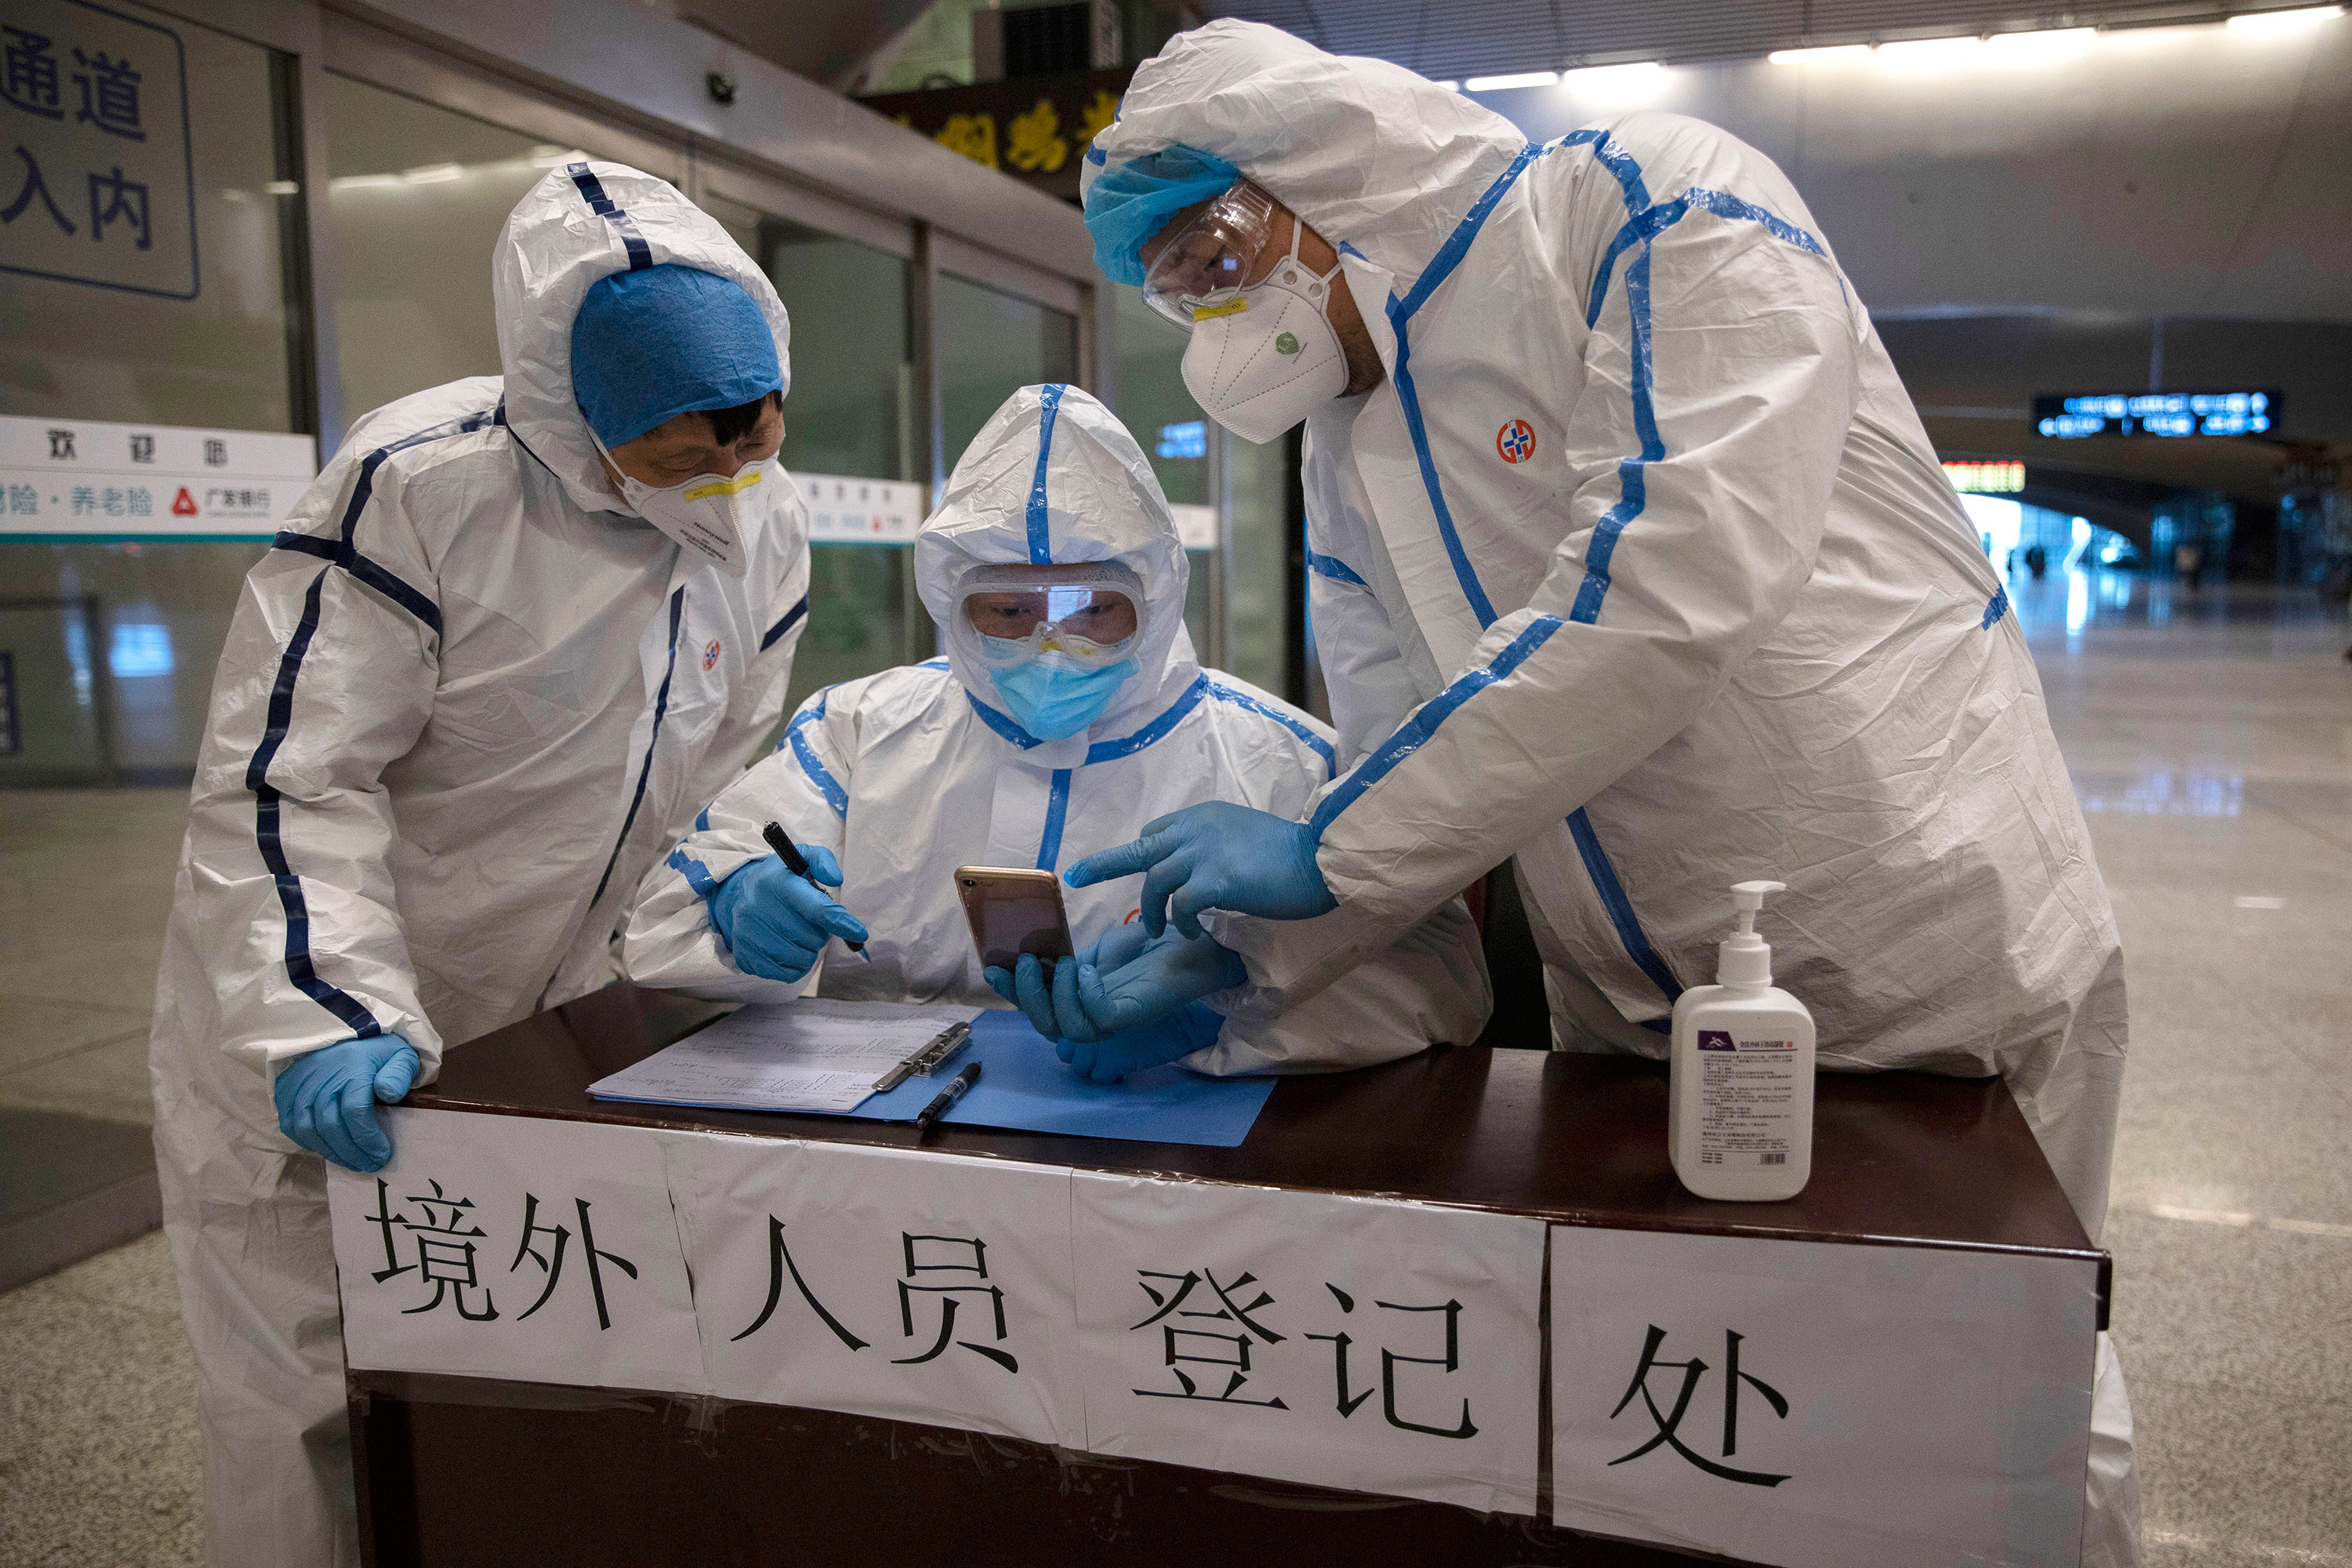 Health workers check details of a passenger arriving at a train station in Wuhan, China on March 29.